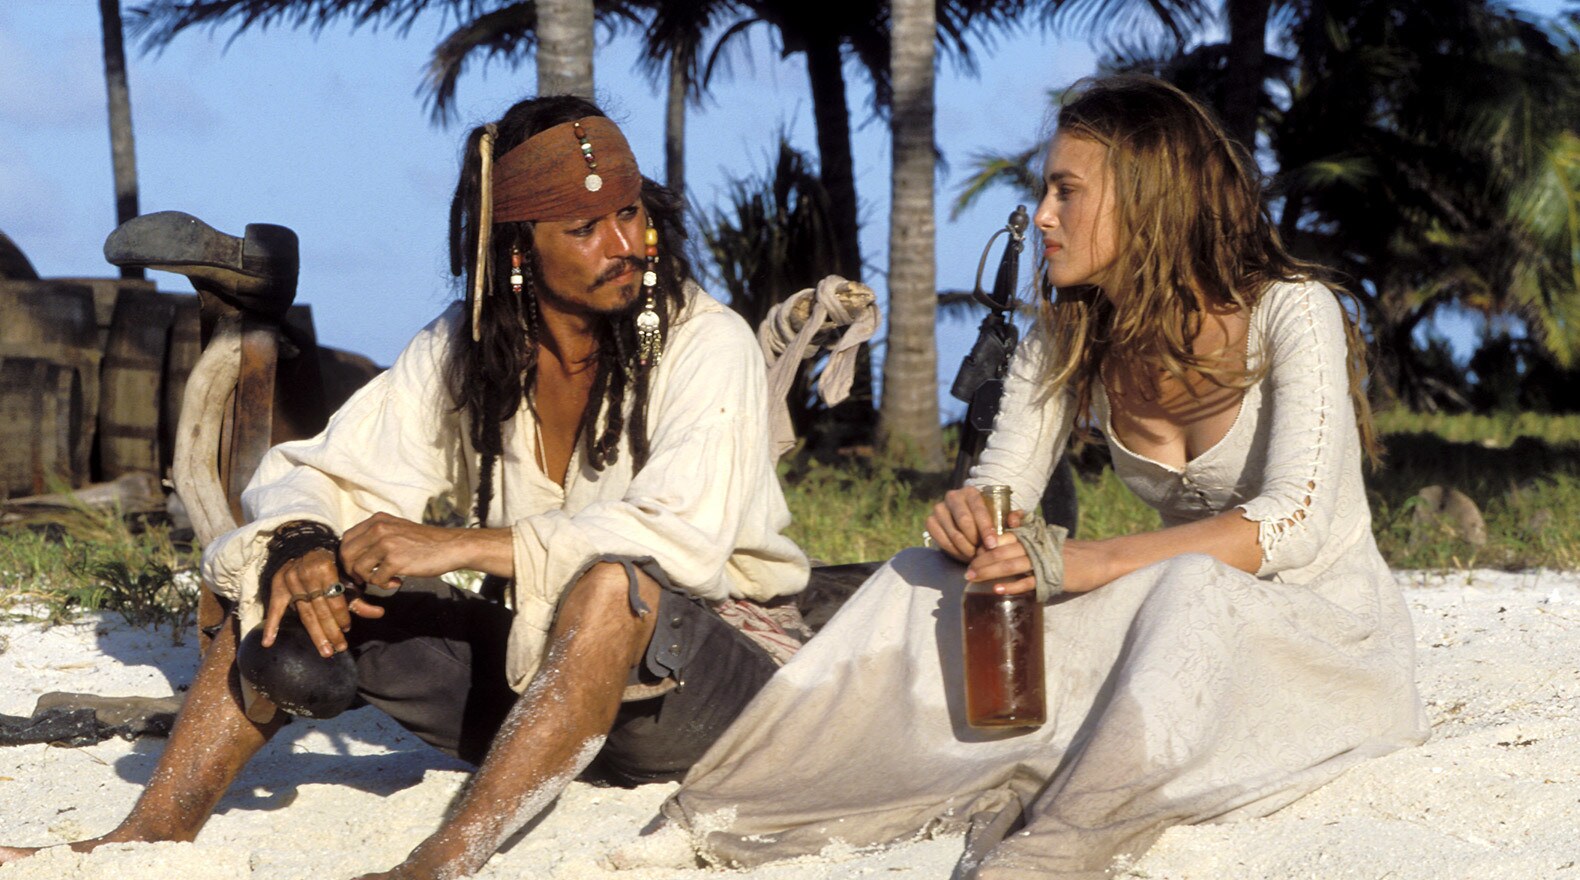 Abandoned on a tiny island, Captain Jack and Elizabeth face an uncertain fate.